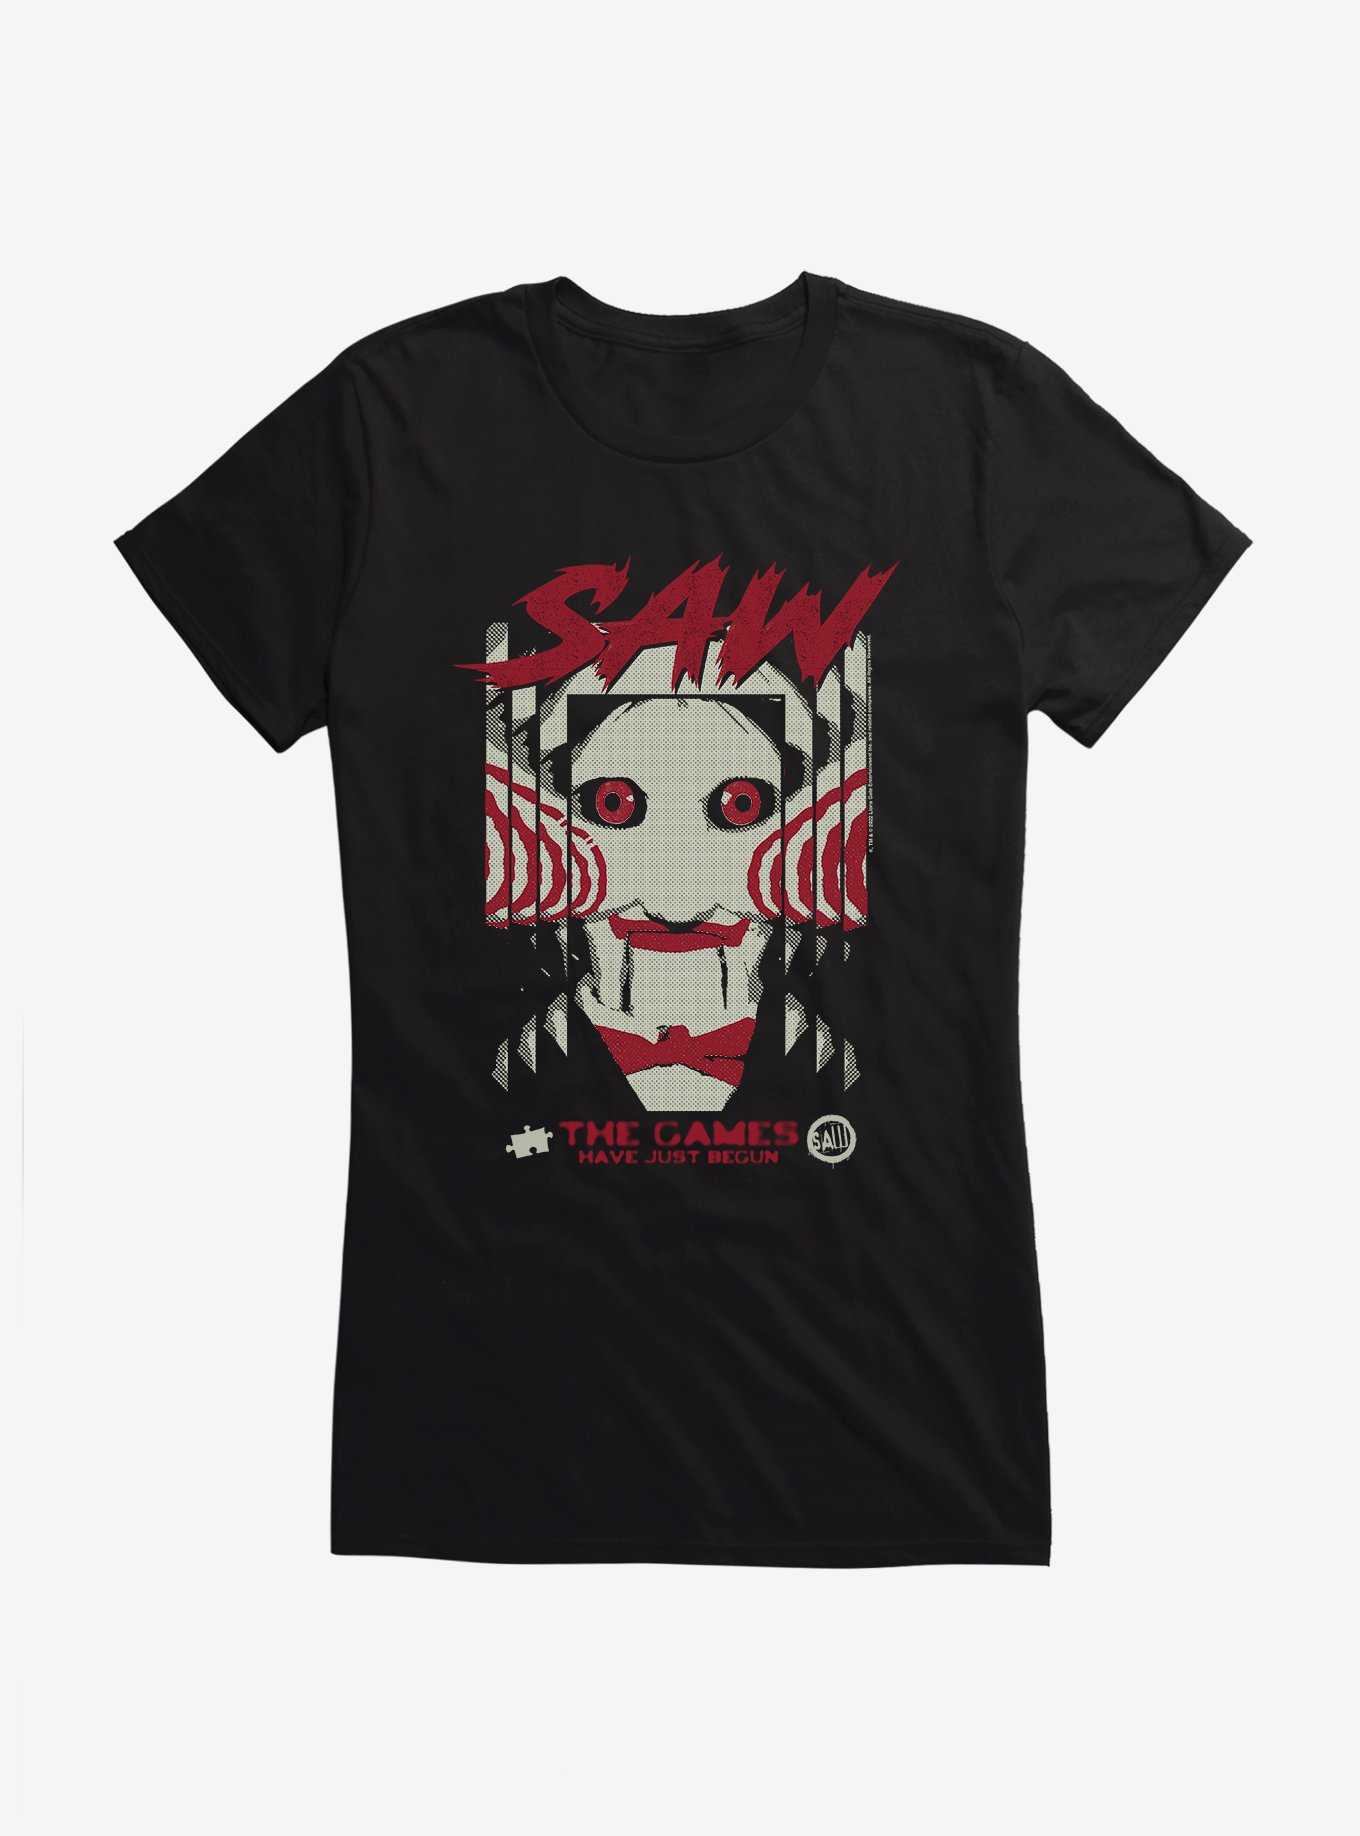 Saw The Games Have Just Begun Girls T-Shirt, , hi-res